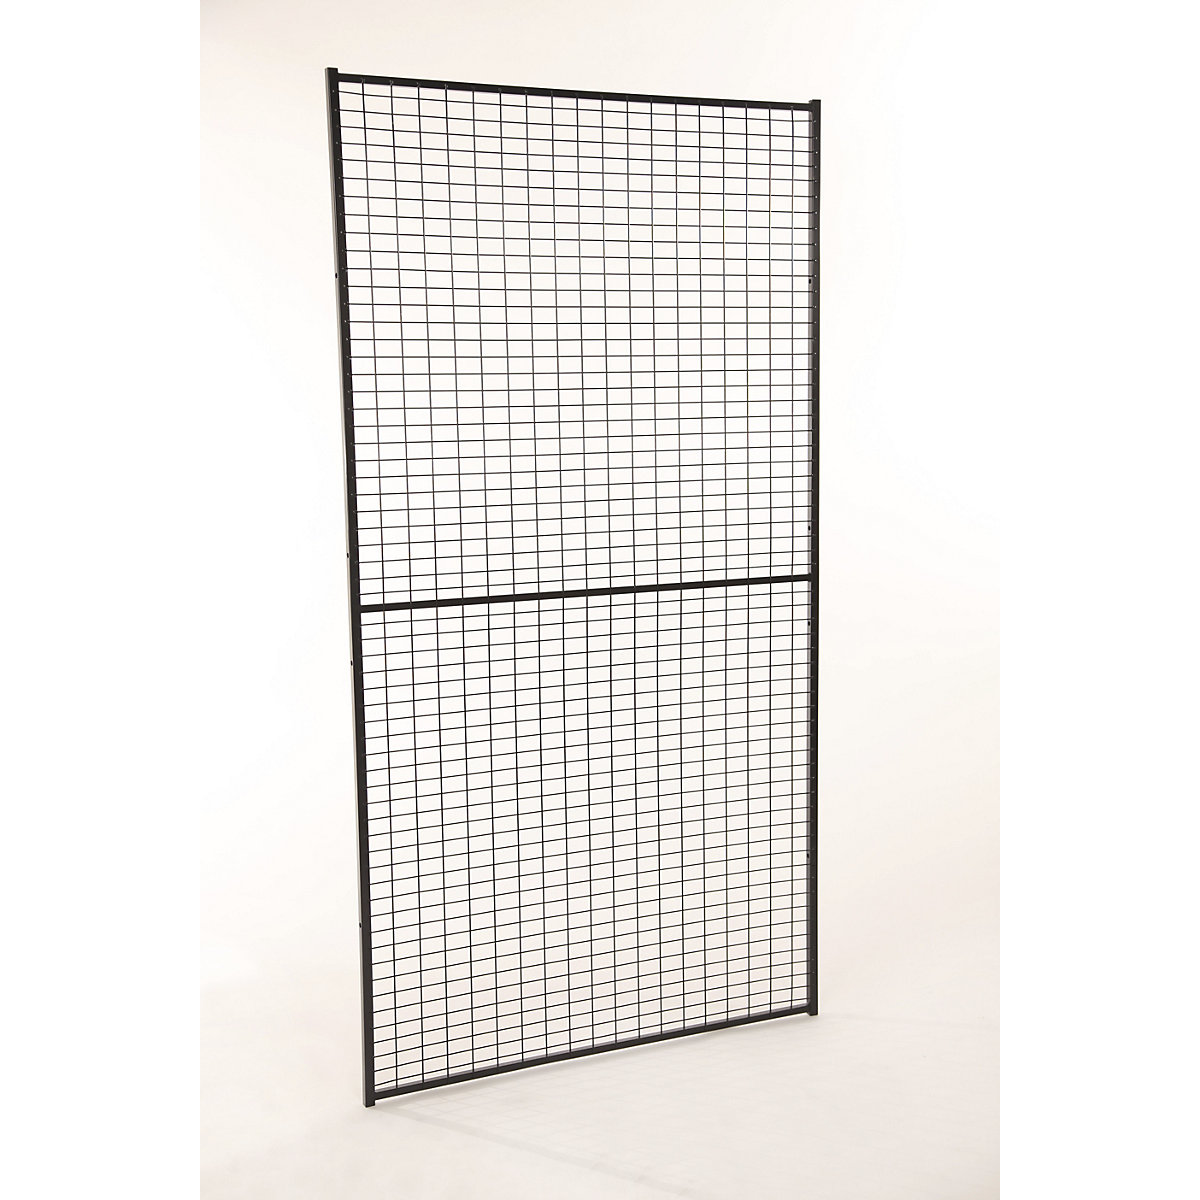 X-GUARD LITE machine protective fencing, wall section – Axelent, height 2200 mm, width 1000 mm-13